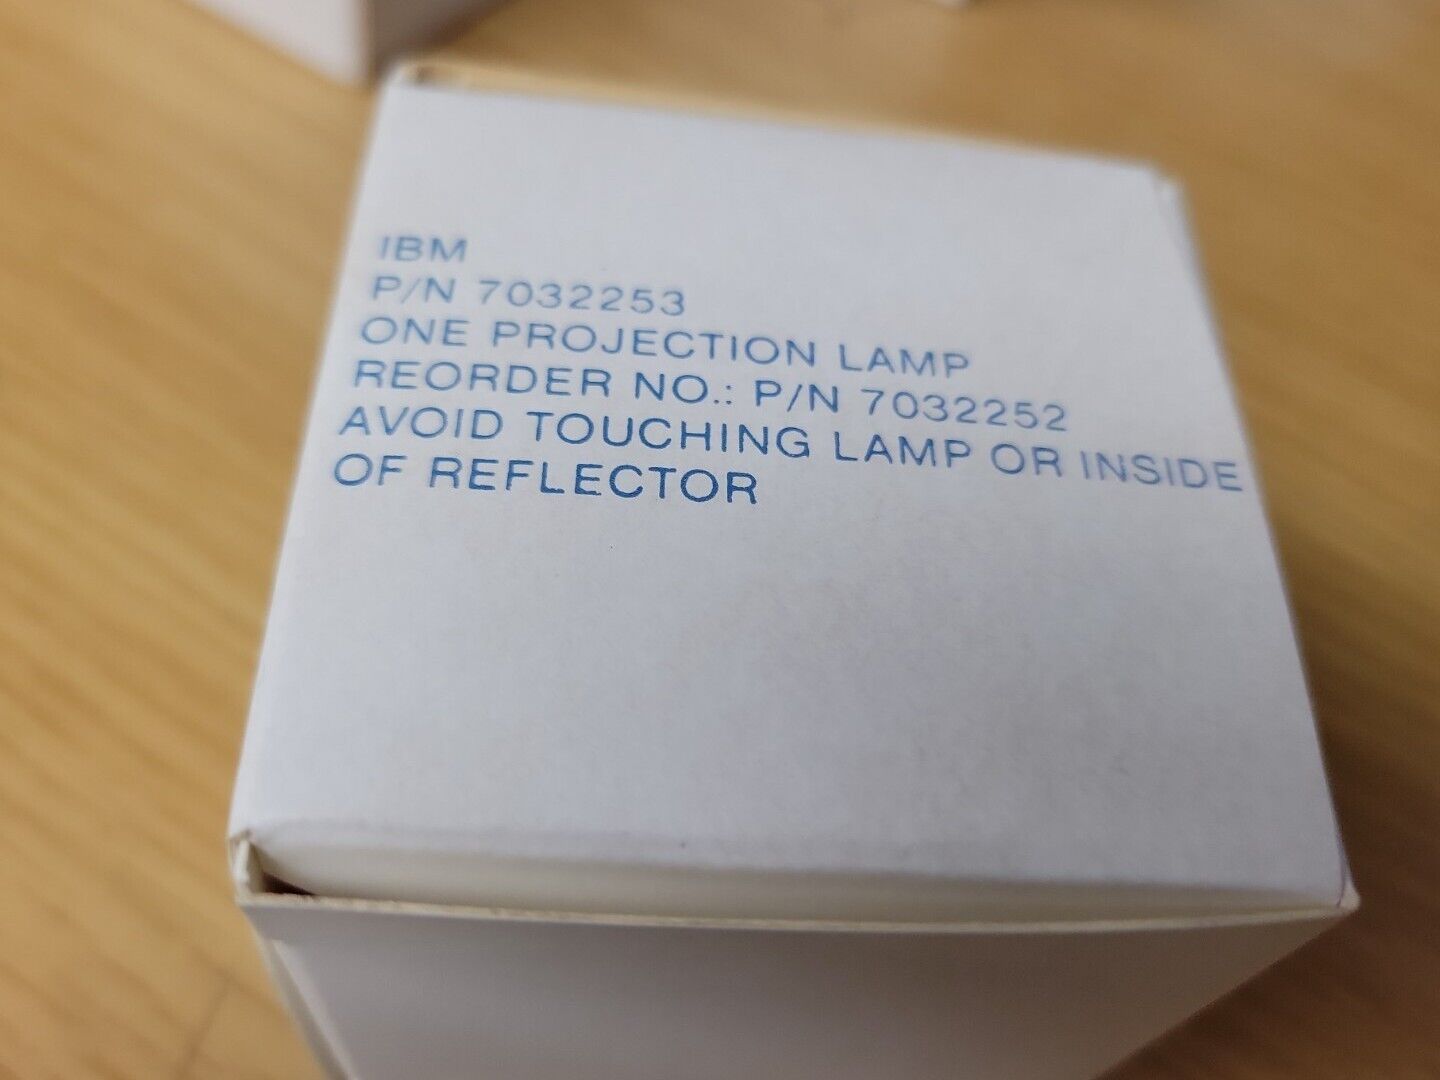 IBM OEM PN/7032253 or PN/7032252 Projection Lamp - New in Box Old Stock EPZ